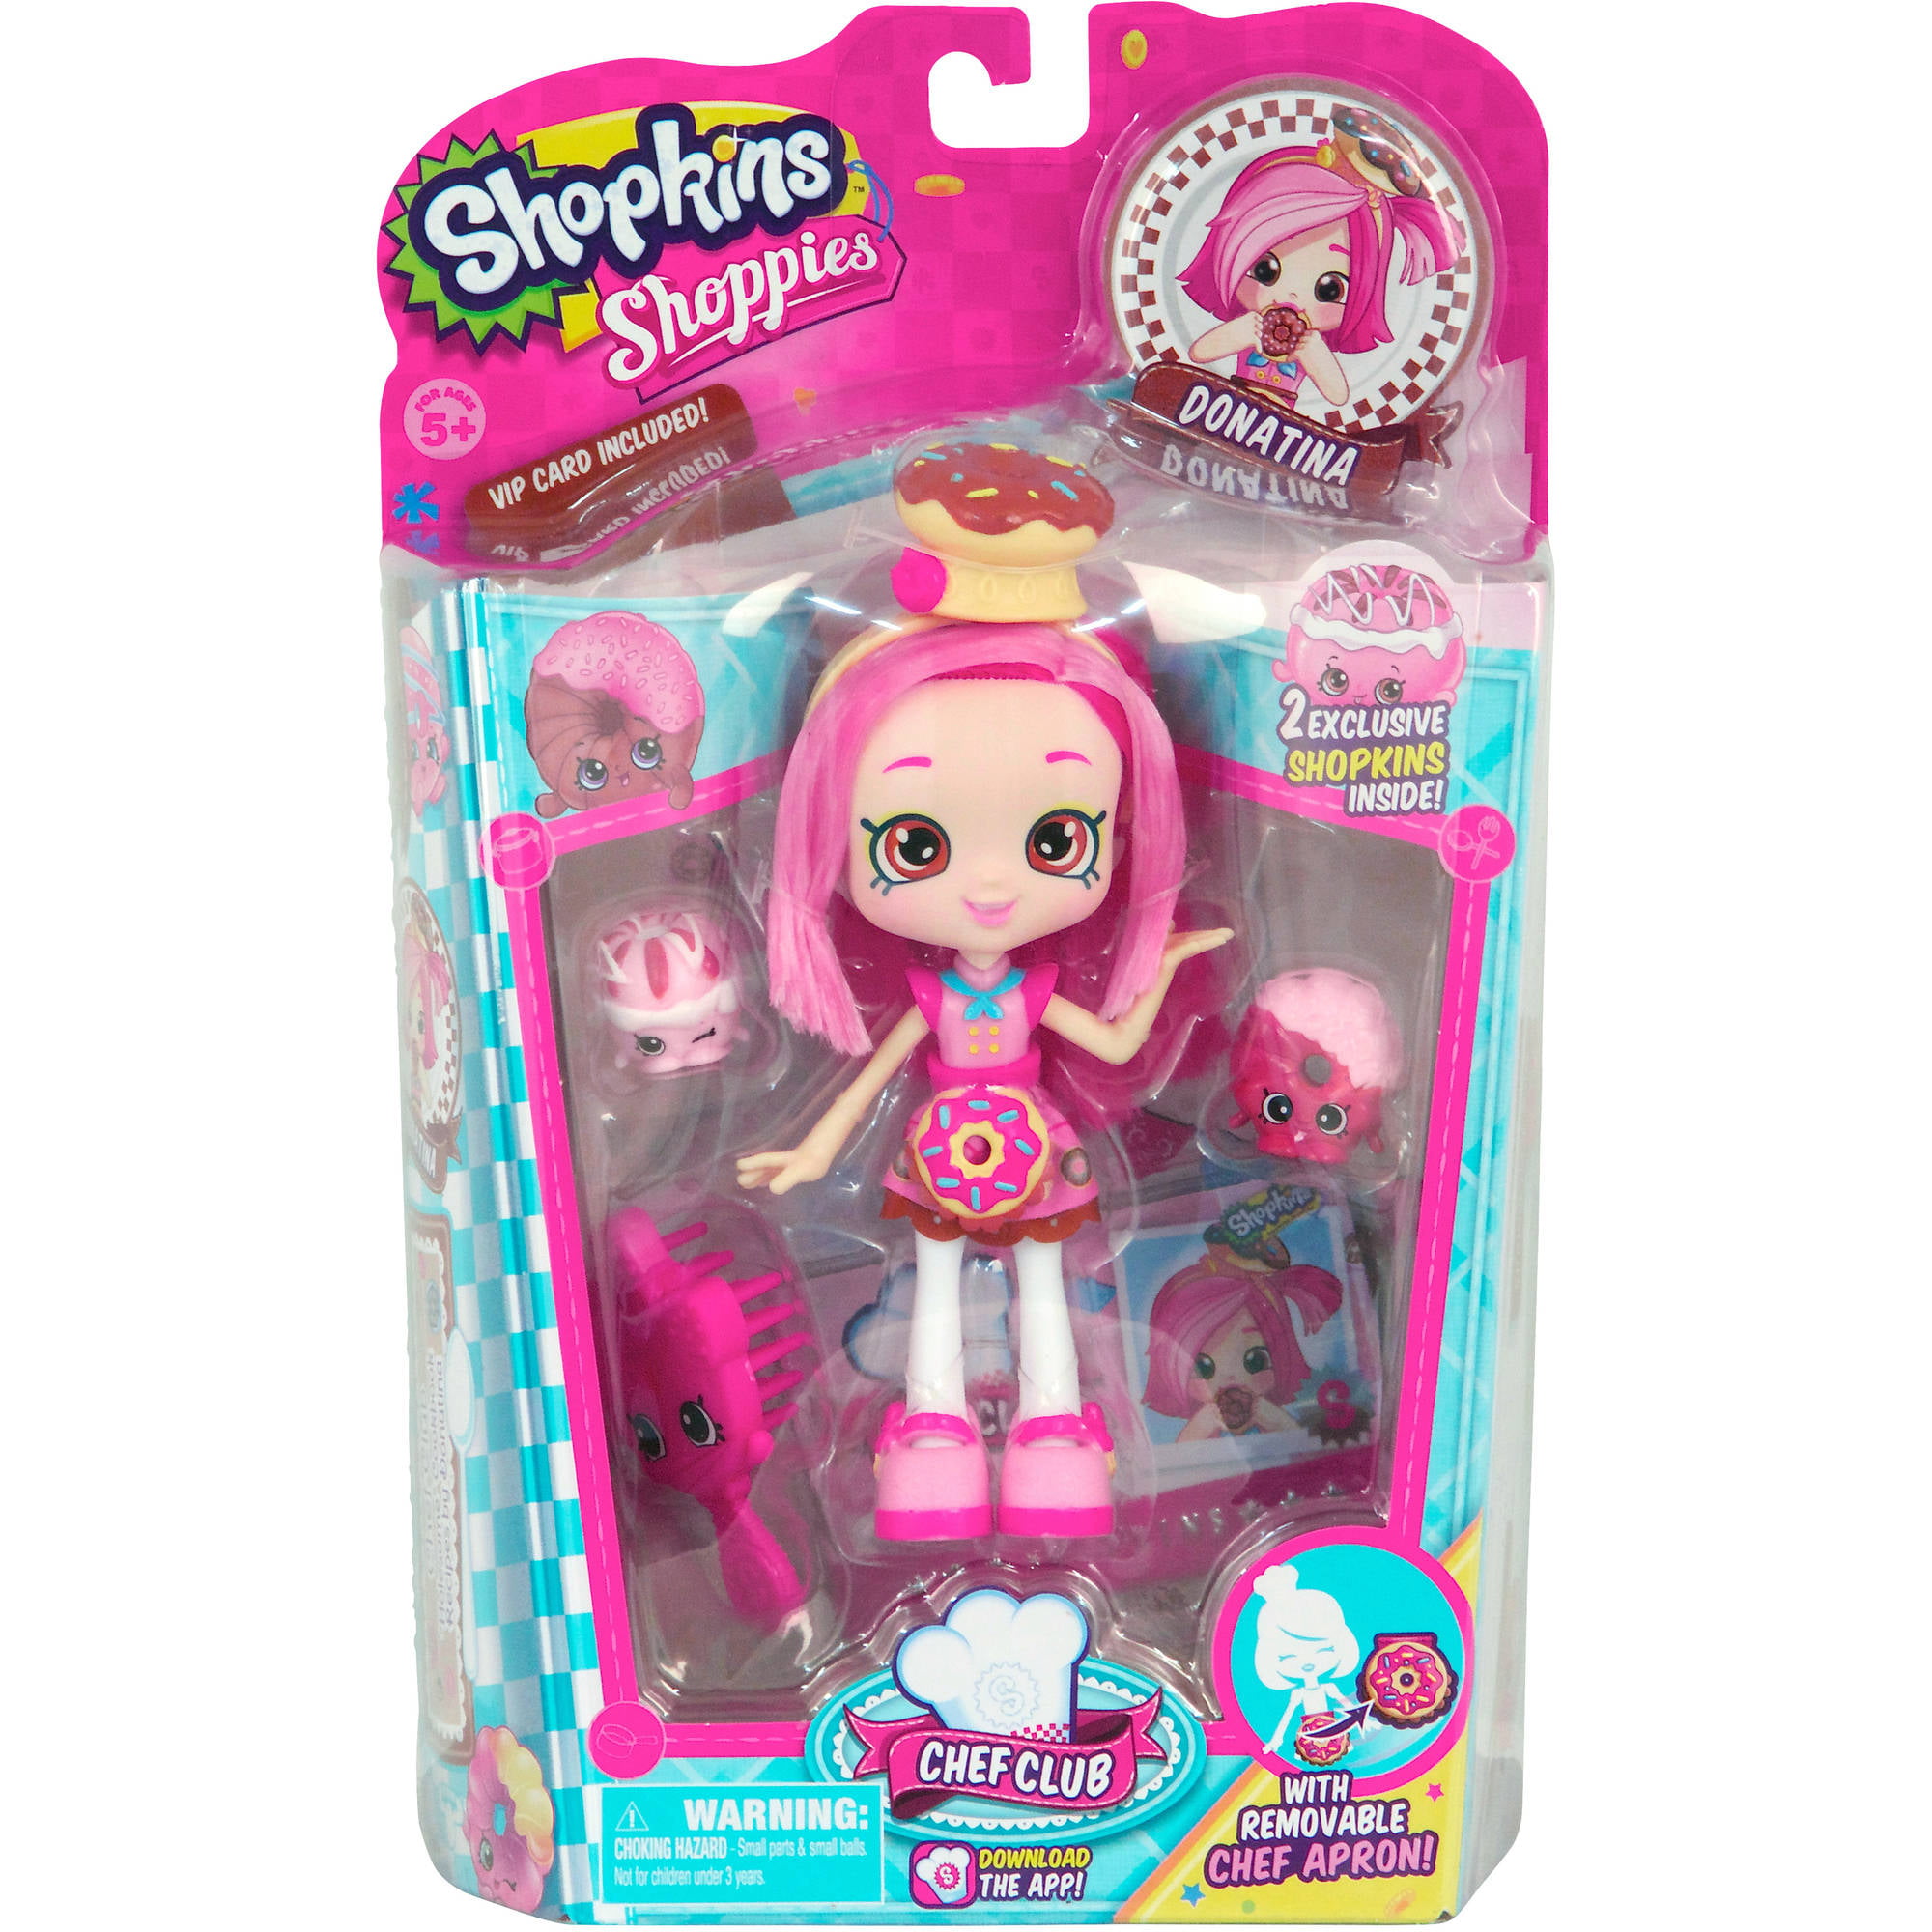 BRAND NEW * SHOPKINS SHOPPIES PAM CAKE INCLUDES 2 EXCLUSIVE SHOPKINS 